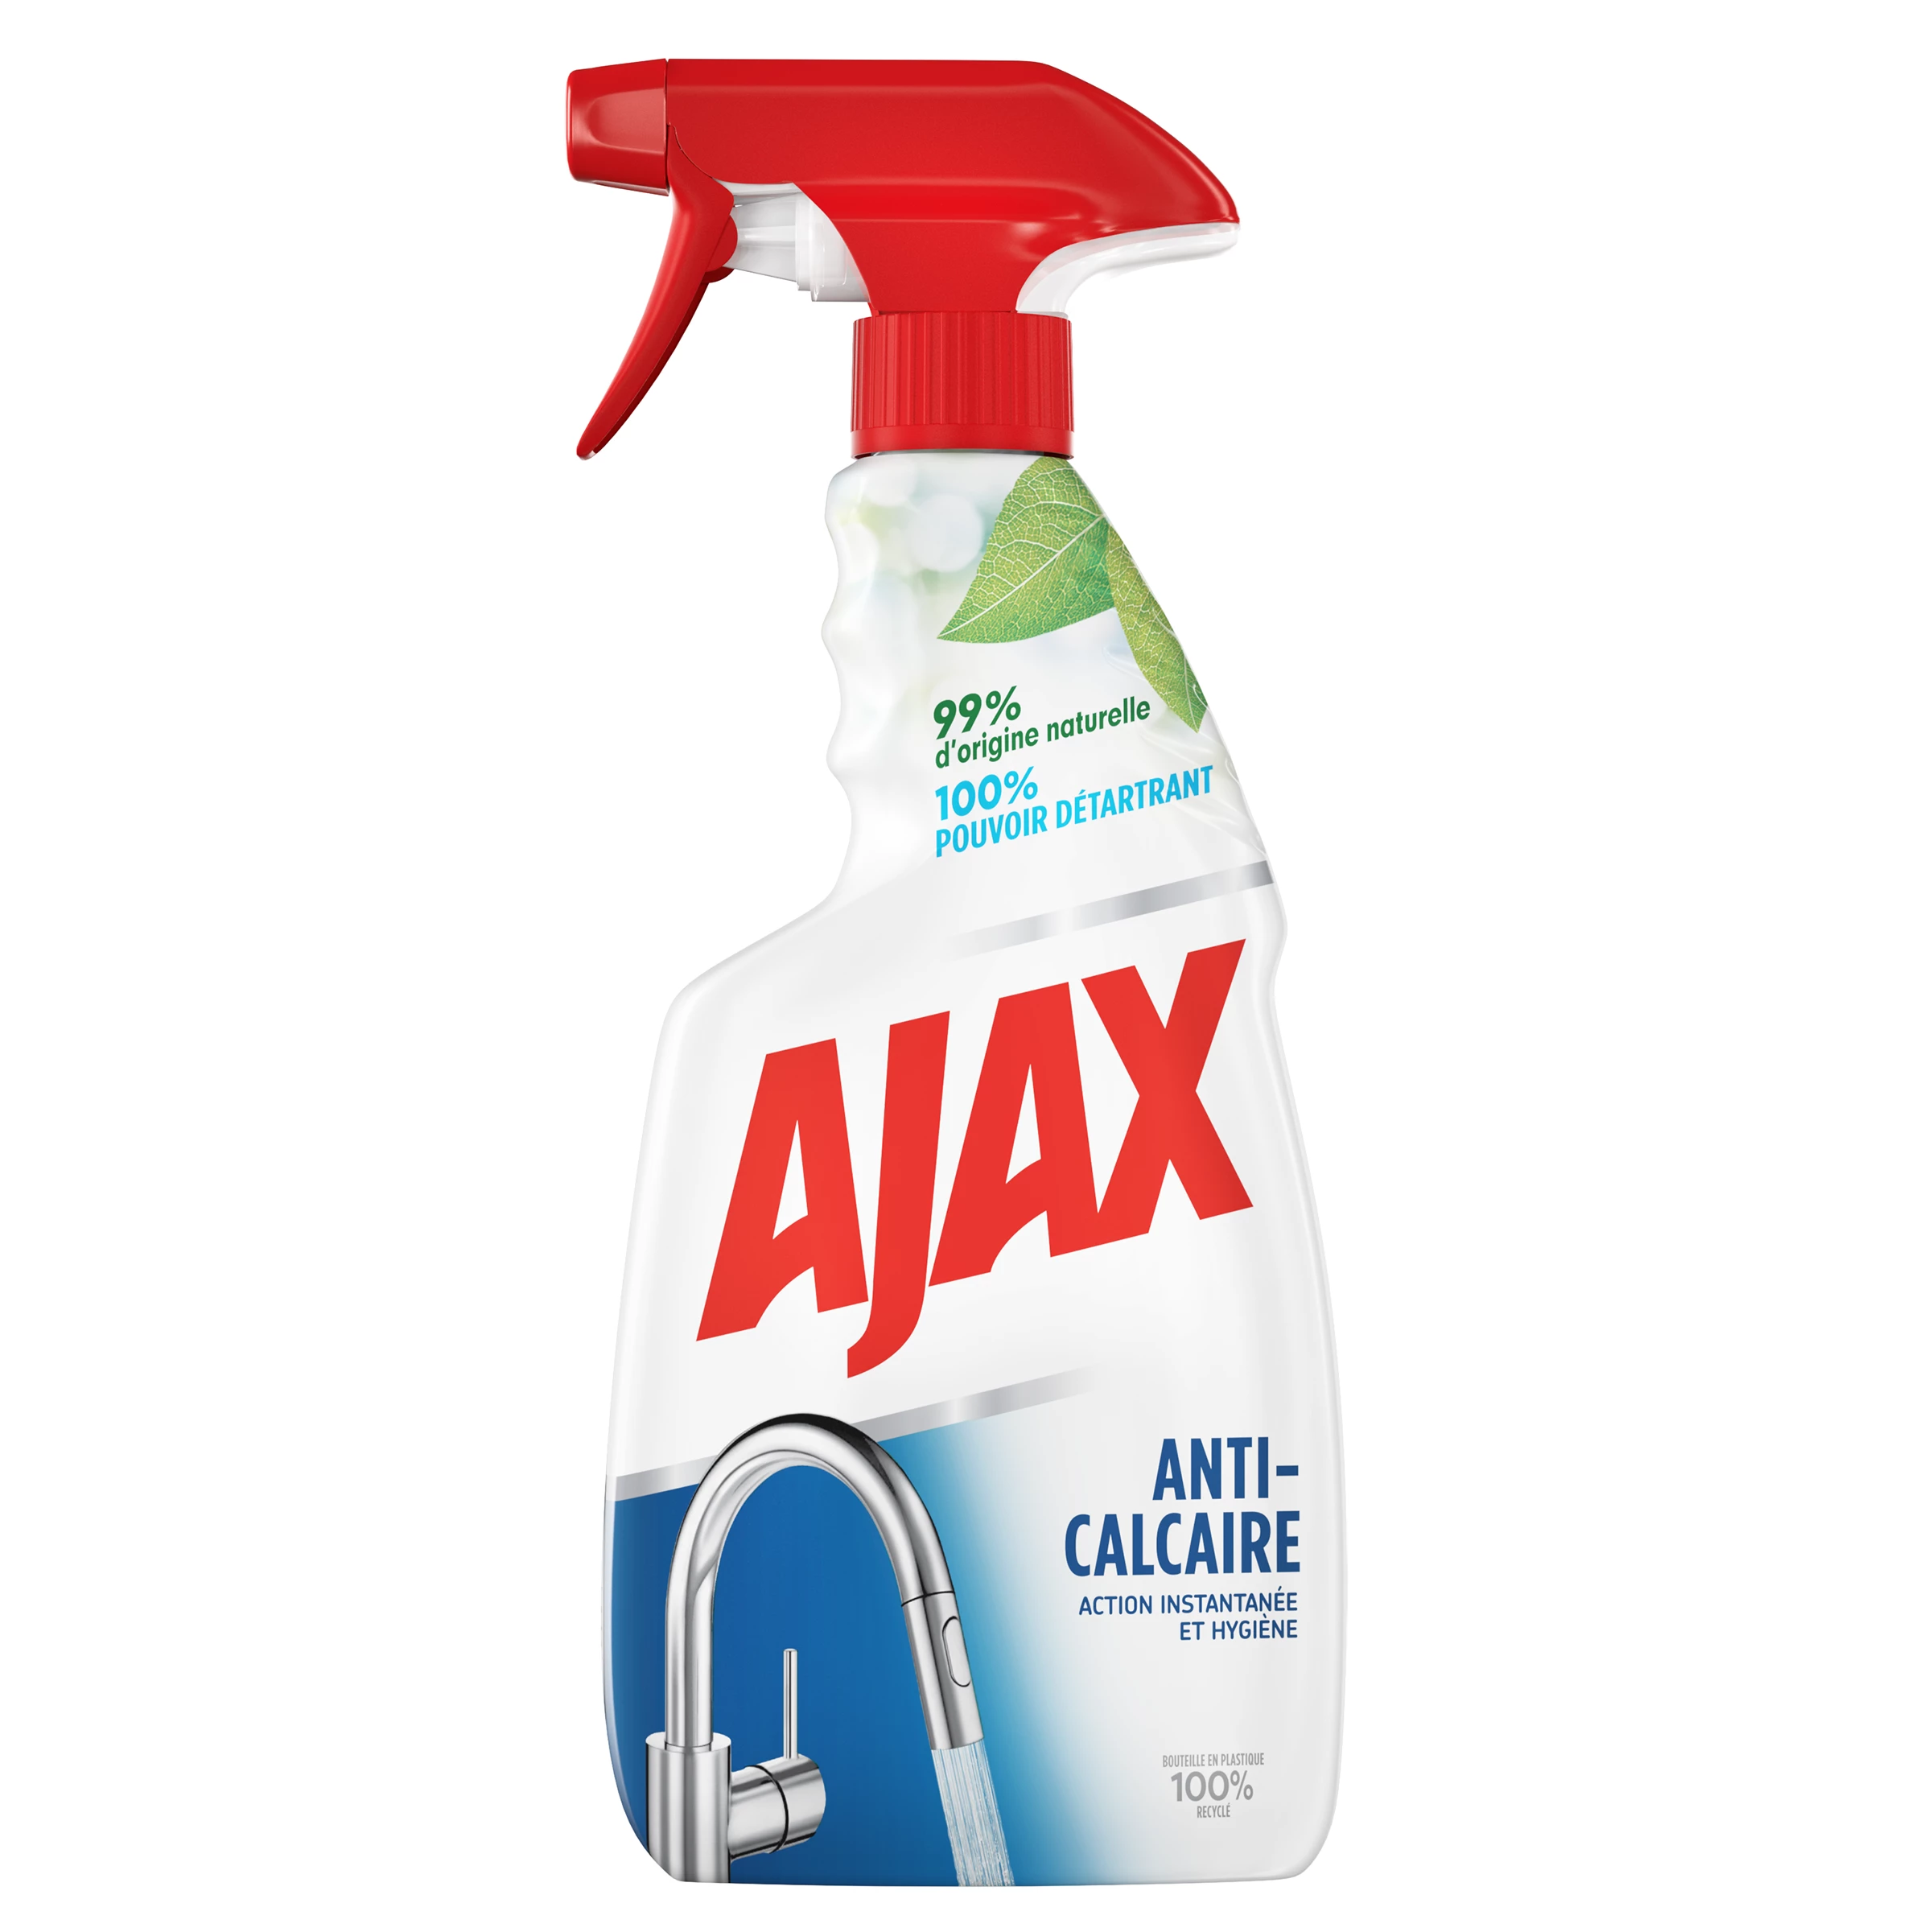 Multi-surface anti-limescale household cleaner - AJAX